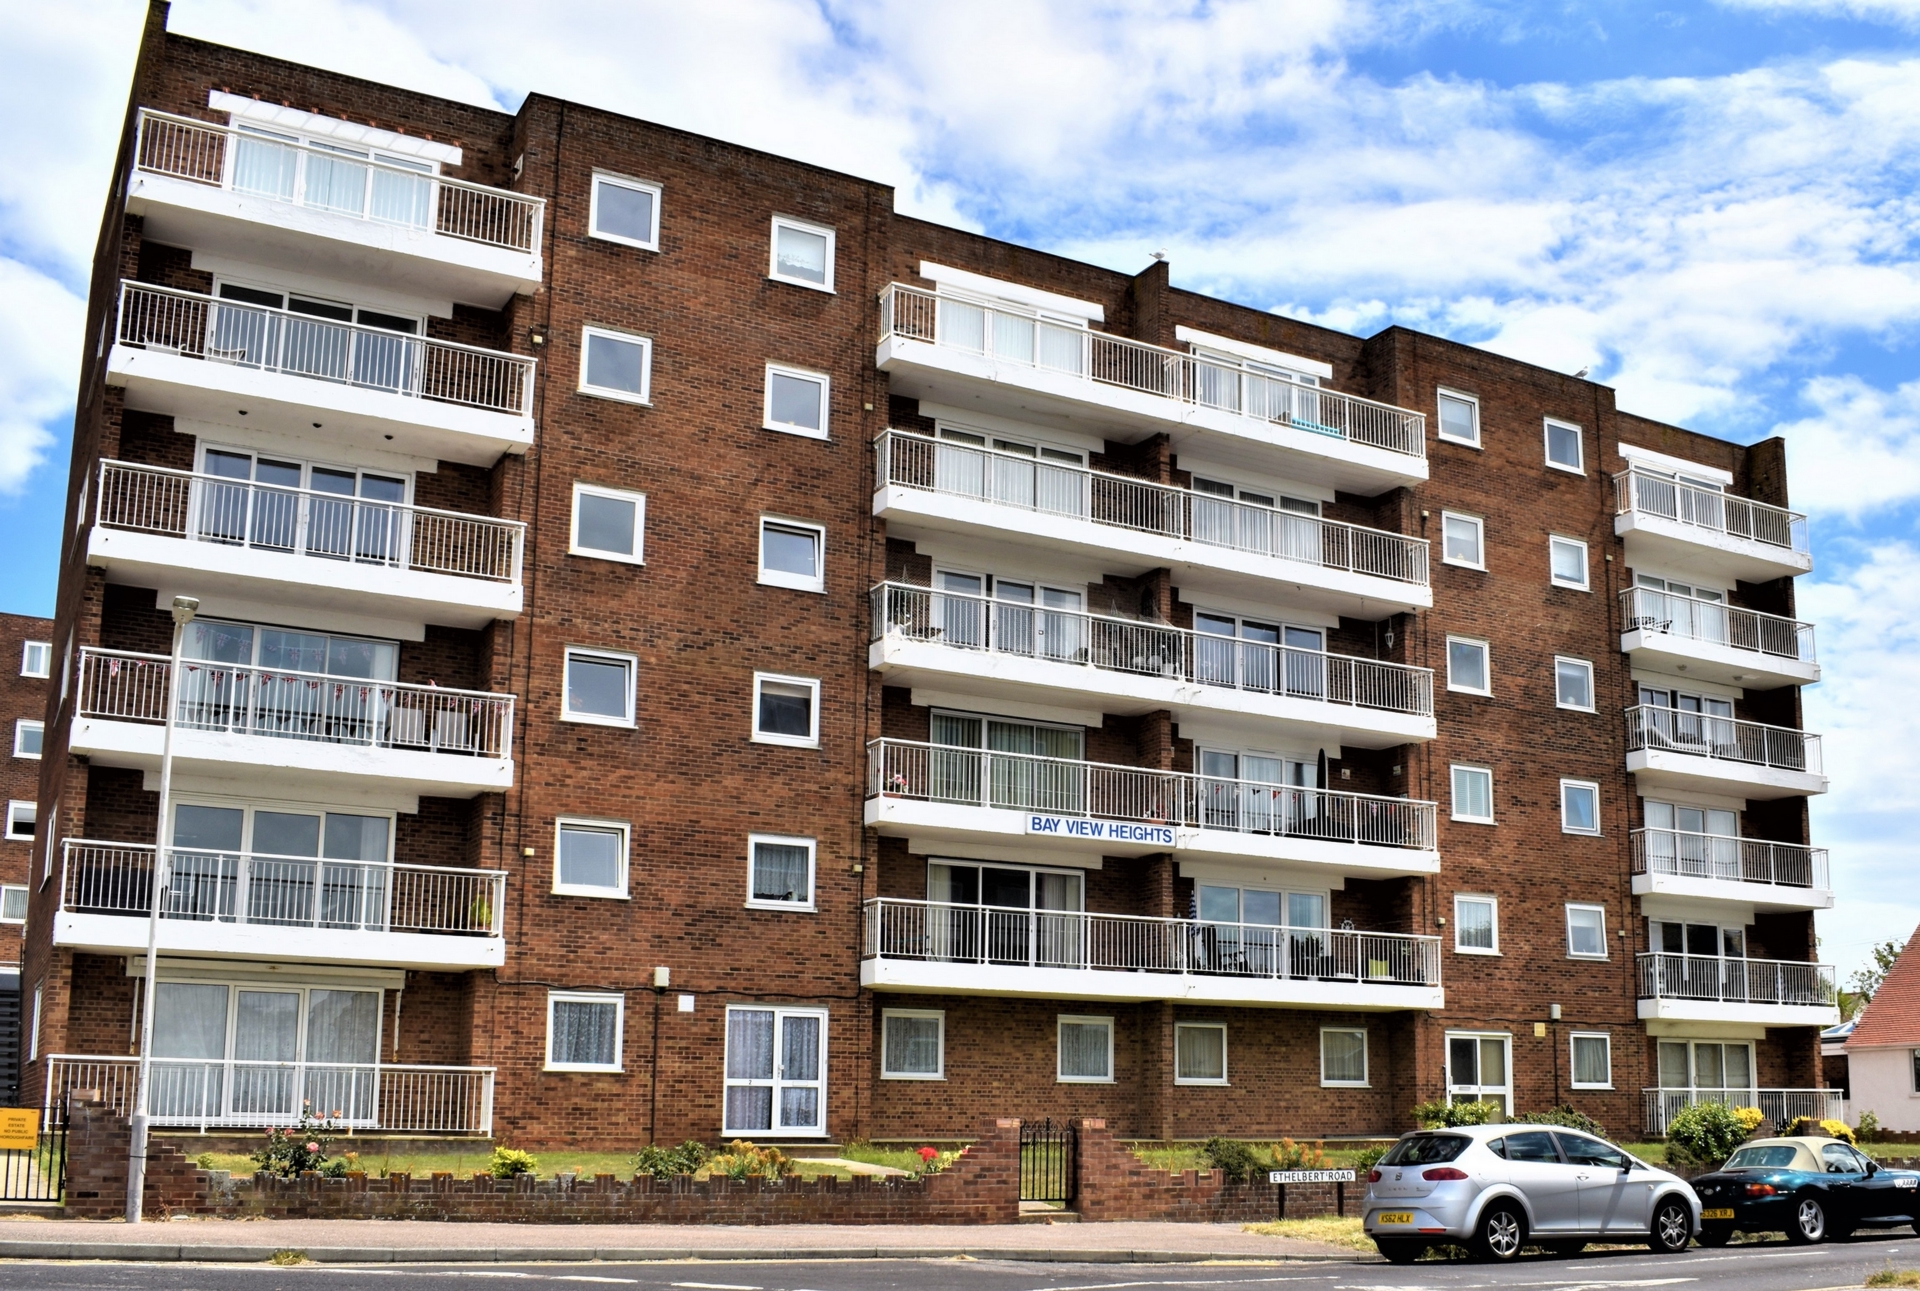 2 Bedroom Balcony flat with stunning sea views, double bedrooms, good size lounge and parking.    Service charge: �1800 per year   The lease has been extended by a deed dated 12th May 2005 to a period of 999 years from 1974.